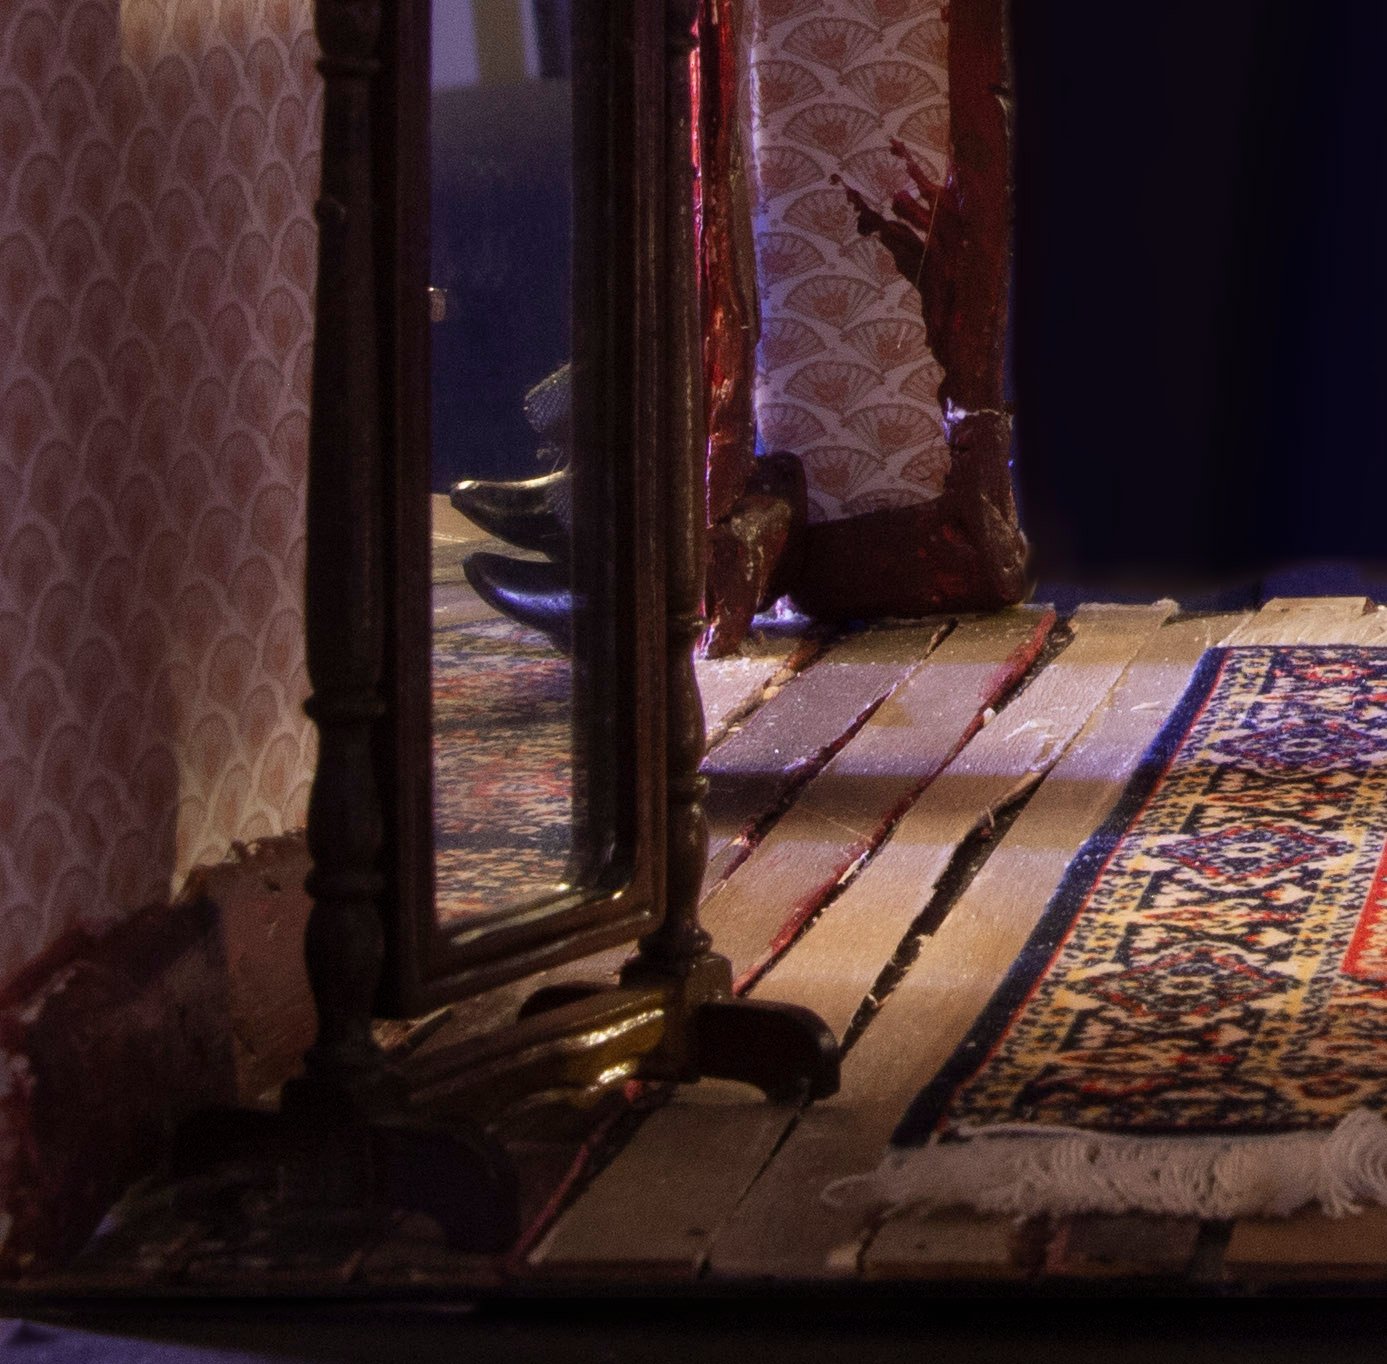 This photograph is a close up of the floorboards and rug the in the diorama. A tiny mirror shows us a peek of Lizzie's father's shoes hanging off the couch.